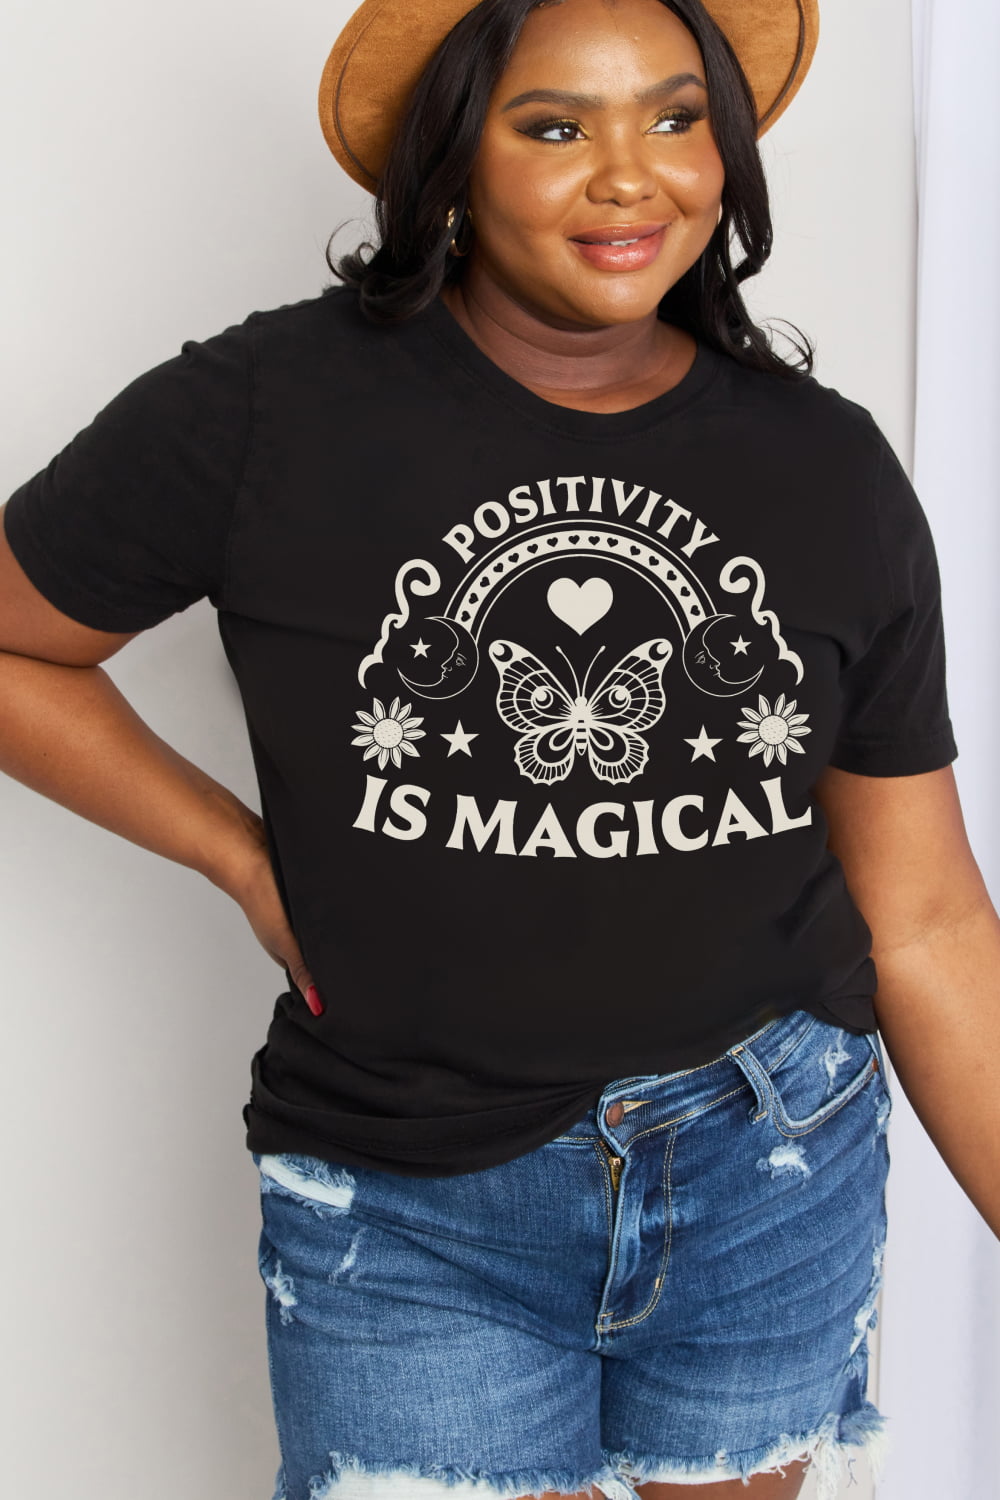 POSITIVITY IS MAGICAL Graphic Cotton Tee